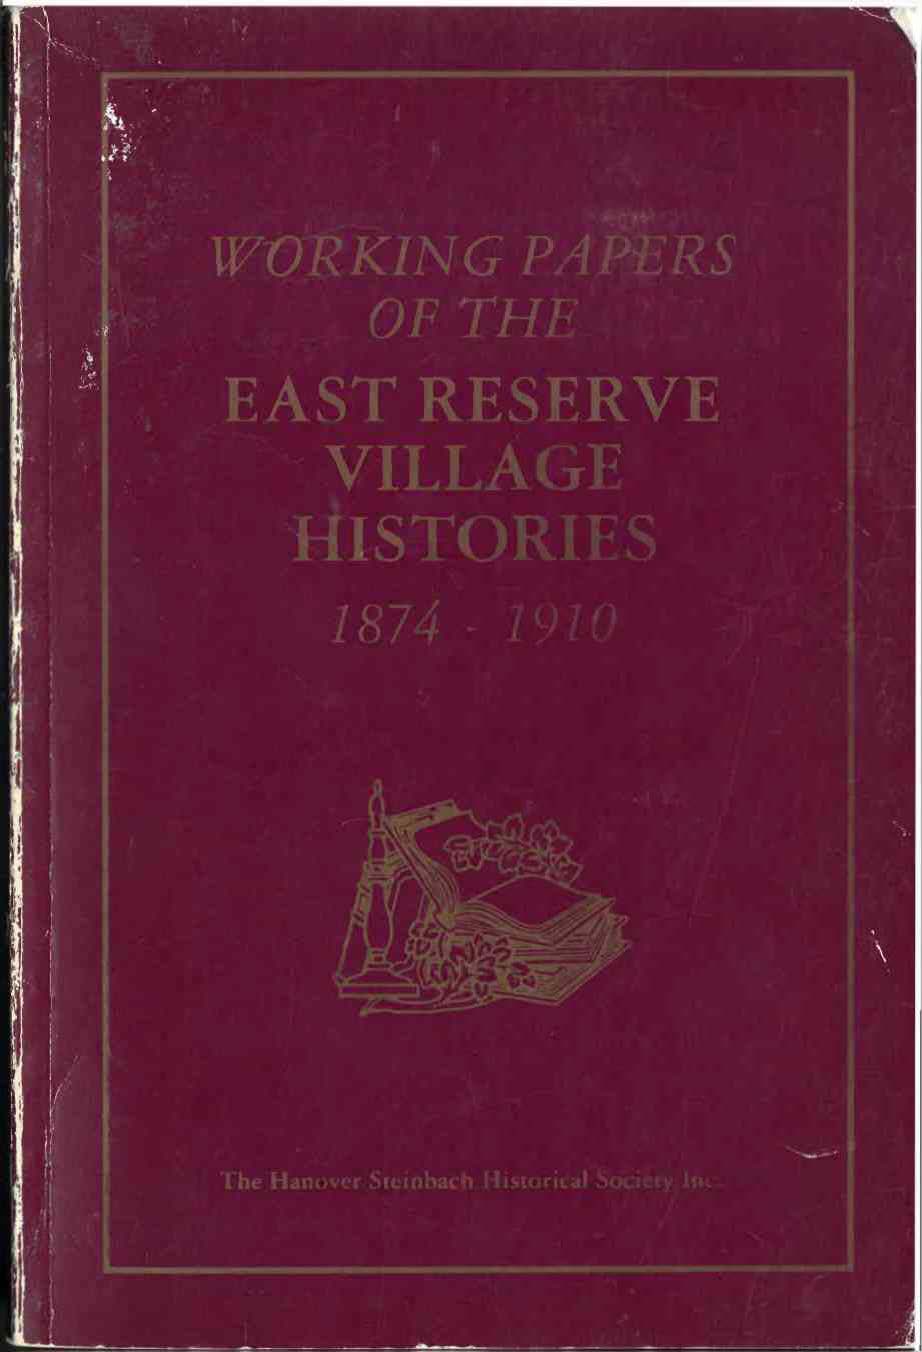 Front cover of the book "Working Papers of the East Reserve Village Histories 1874-1910"